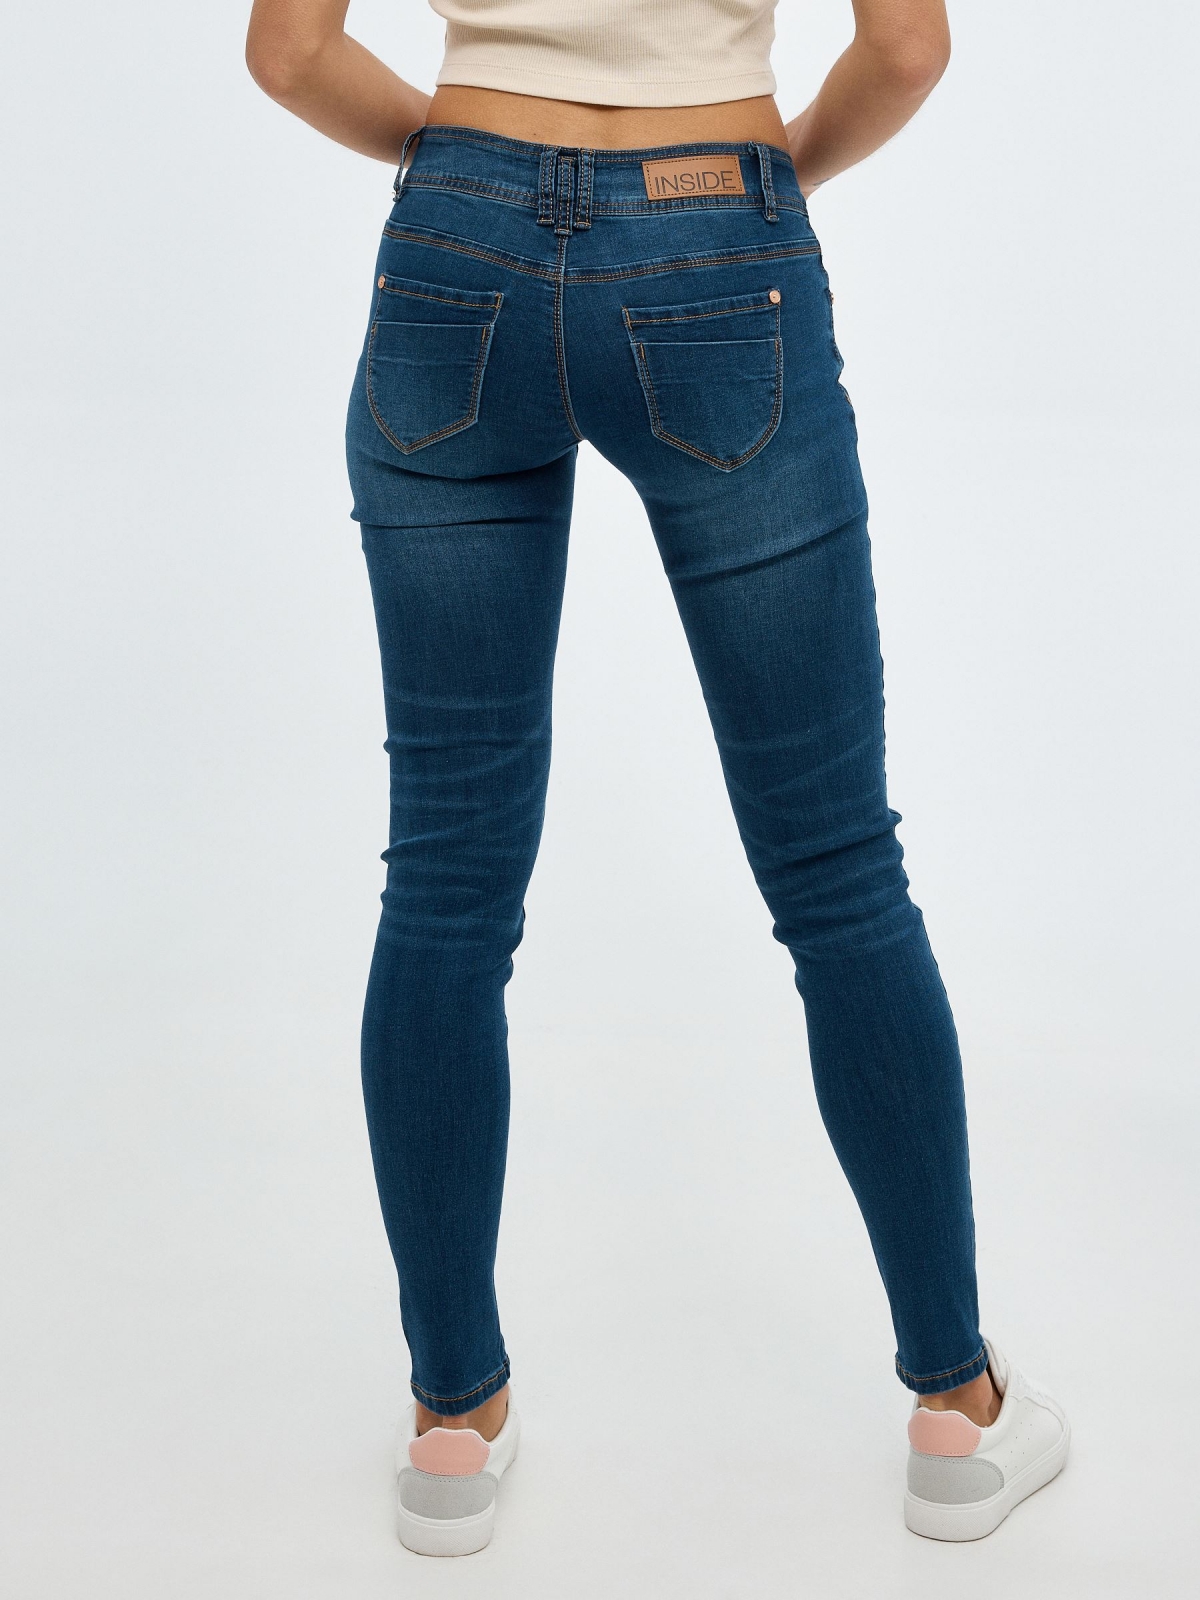 Low-rise distressed skinny jeans blue middle back view